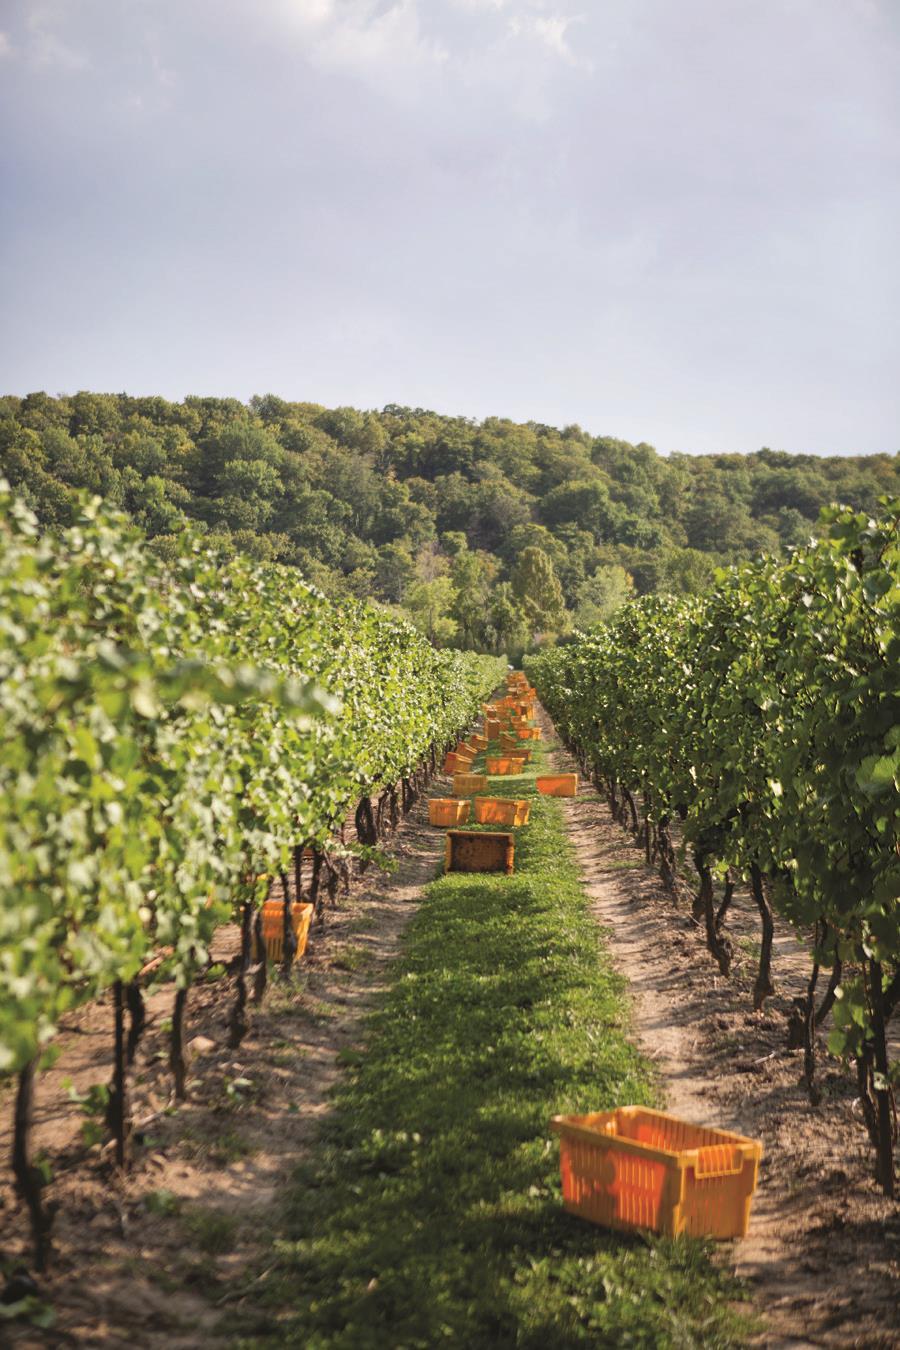 Canada Main Grape Varieties ONTARIO Core White Varieties: Riesling, Chardonnay Core Red Varieties: Pinot Noir, Cabernet Franc, Gamay Noir BRITISH COLUMBIA Most Planted Whites: Pinot Gris, Chardonnay,